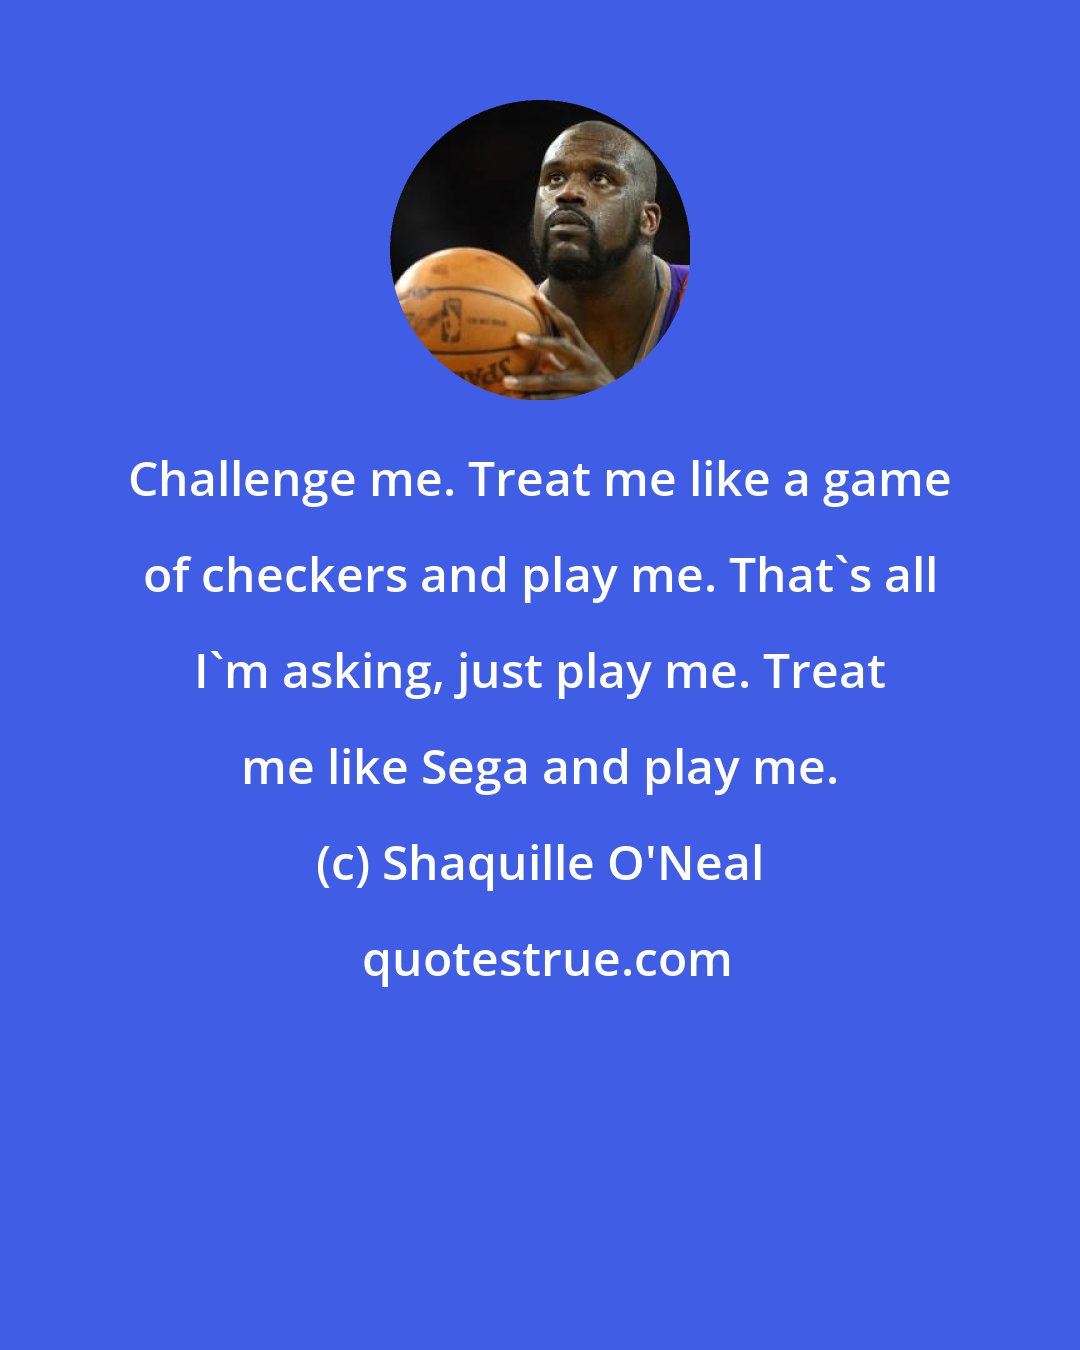 Shaquille O'Neal: Challenge me. Treat me like a game of checkers and play me. That's all I'm asking, just play me. Treat me like Sega and play me.